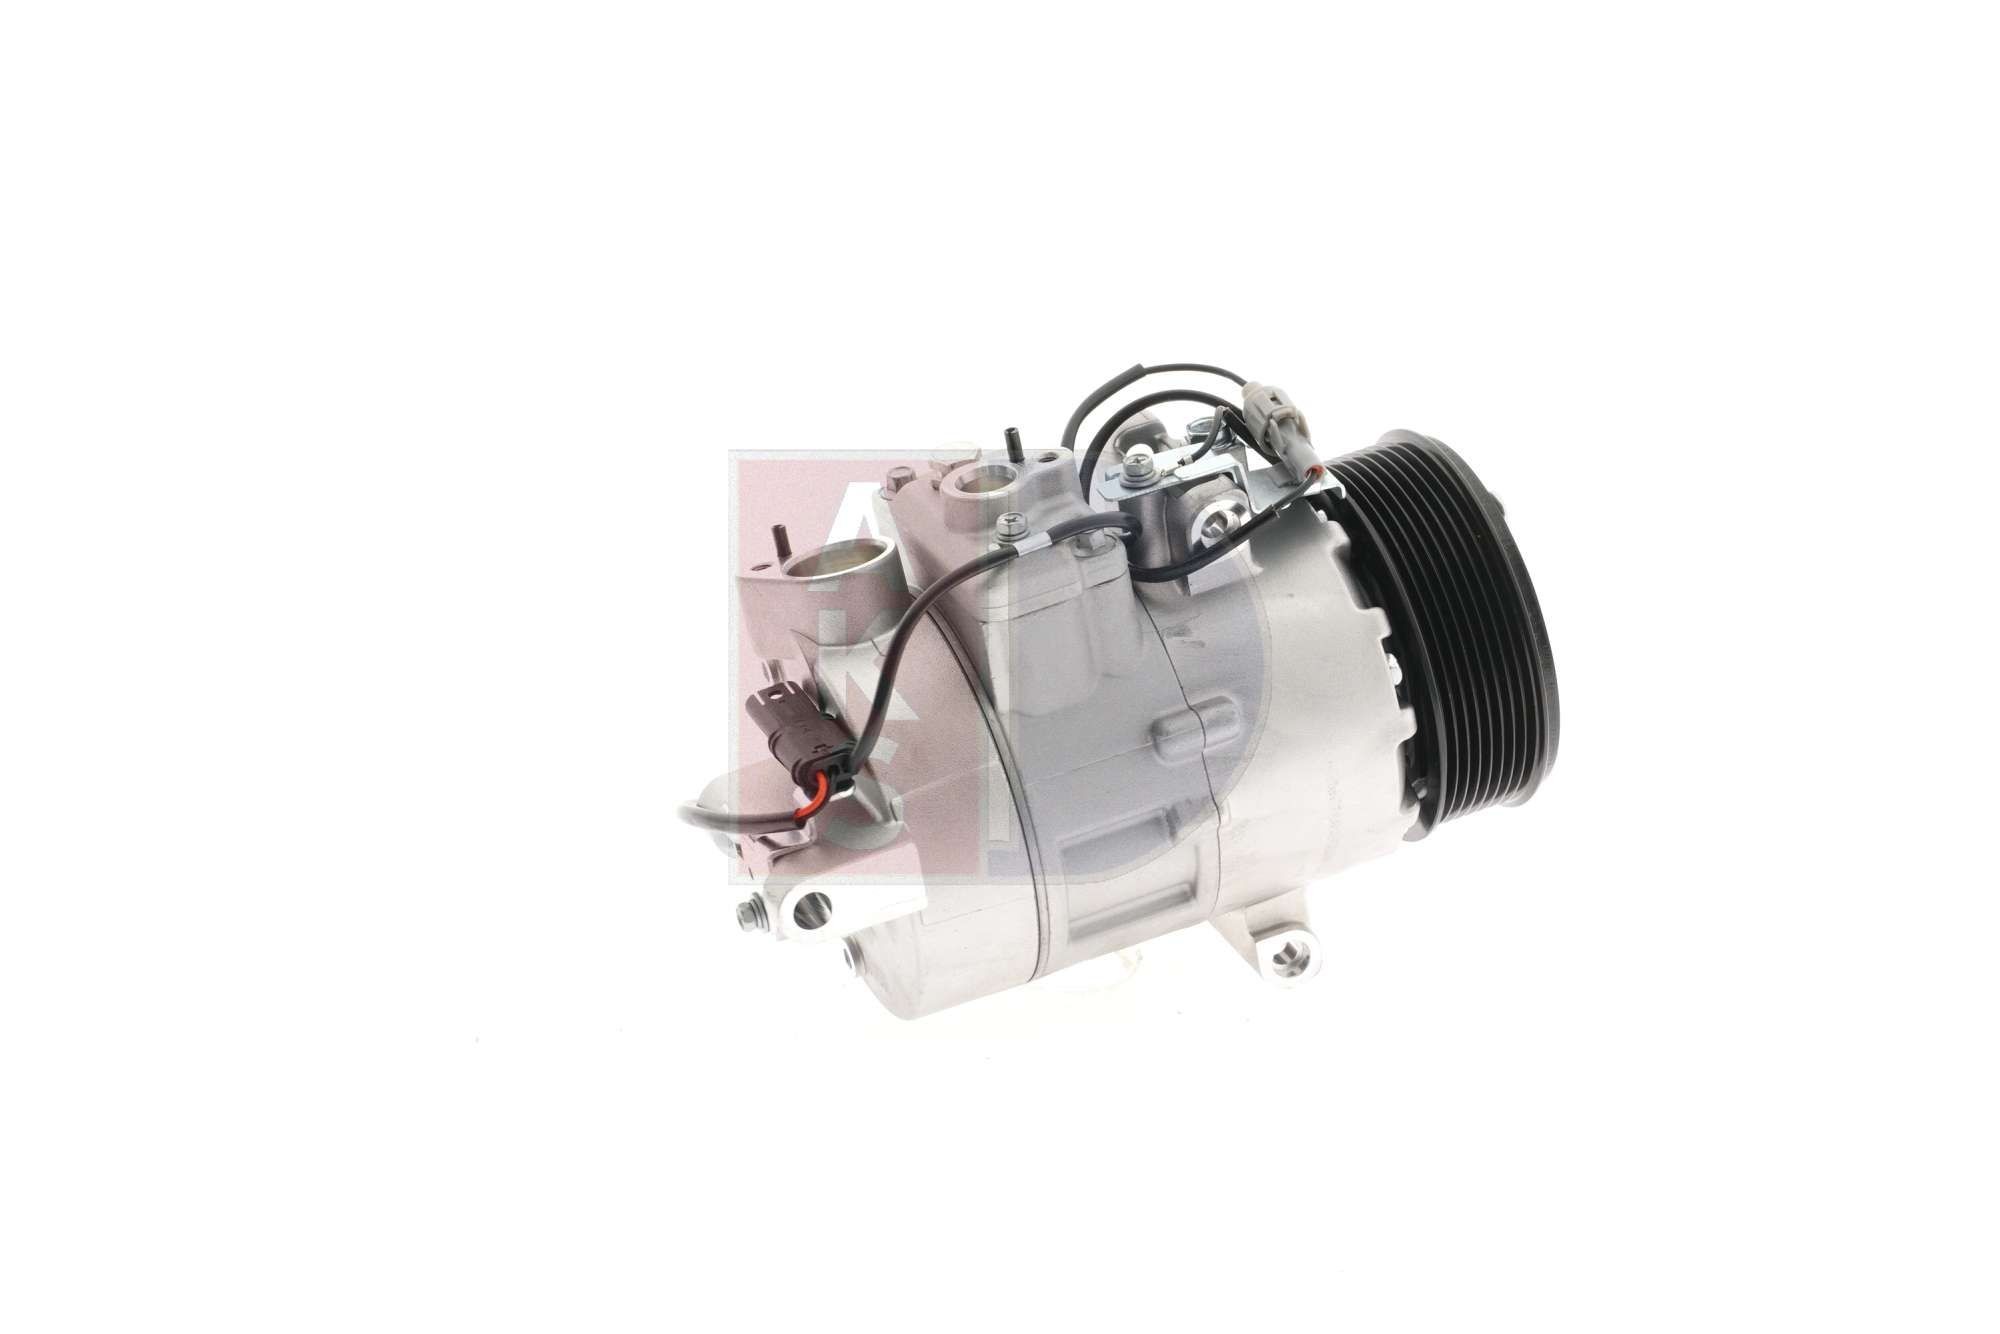 Air conditioning compressor 852546N from AKS DASIS